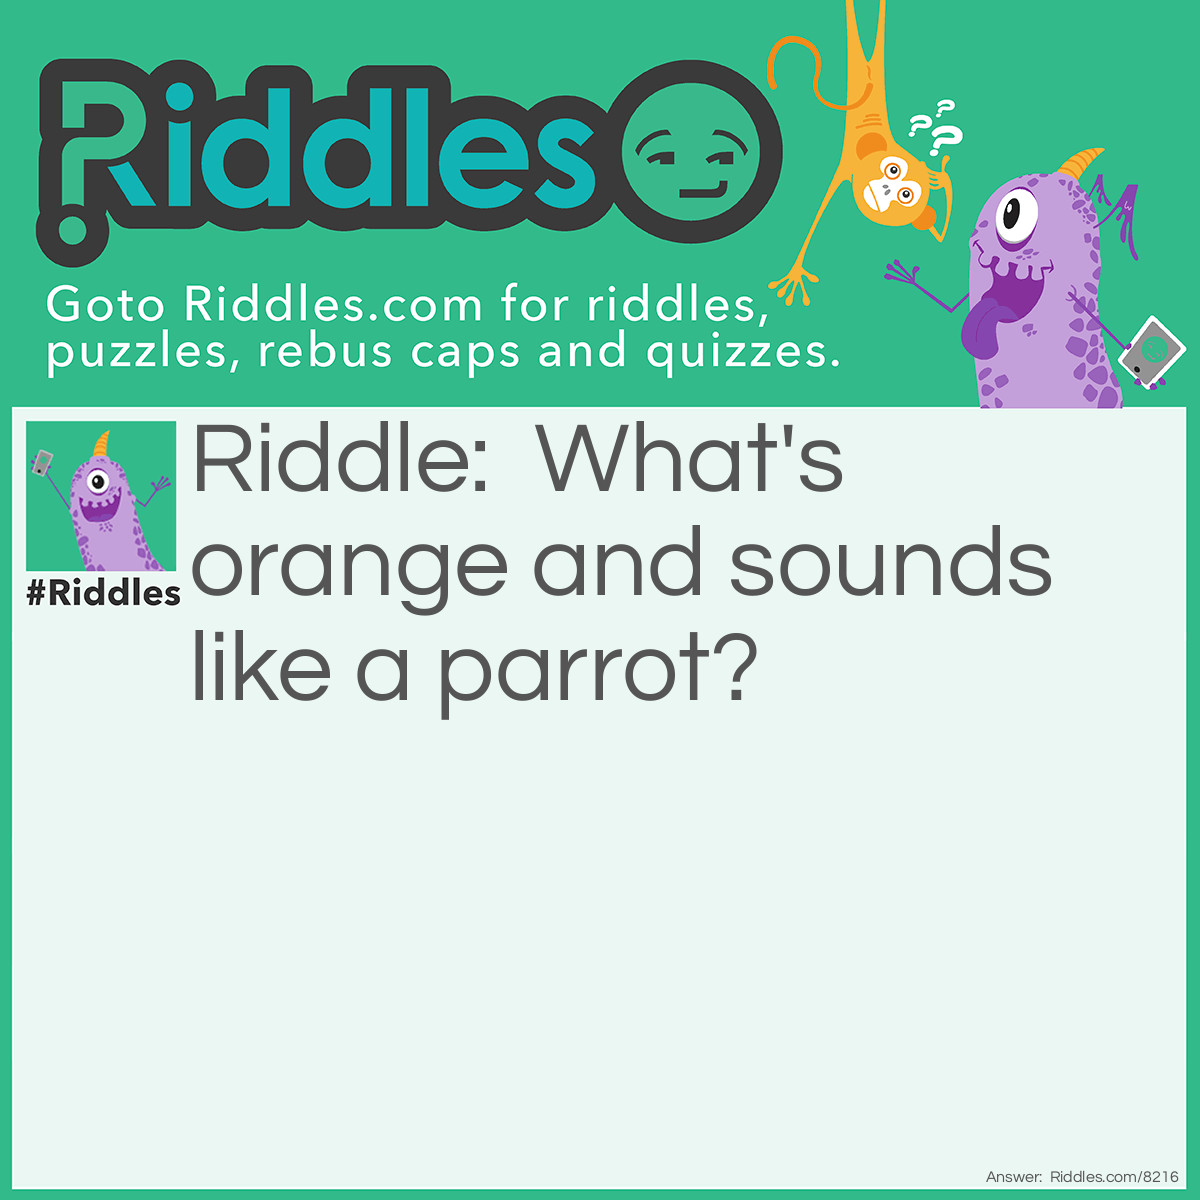 Riddle: What's orange and sounds like a parrot? Answer: A carrot.